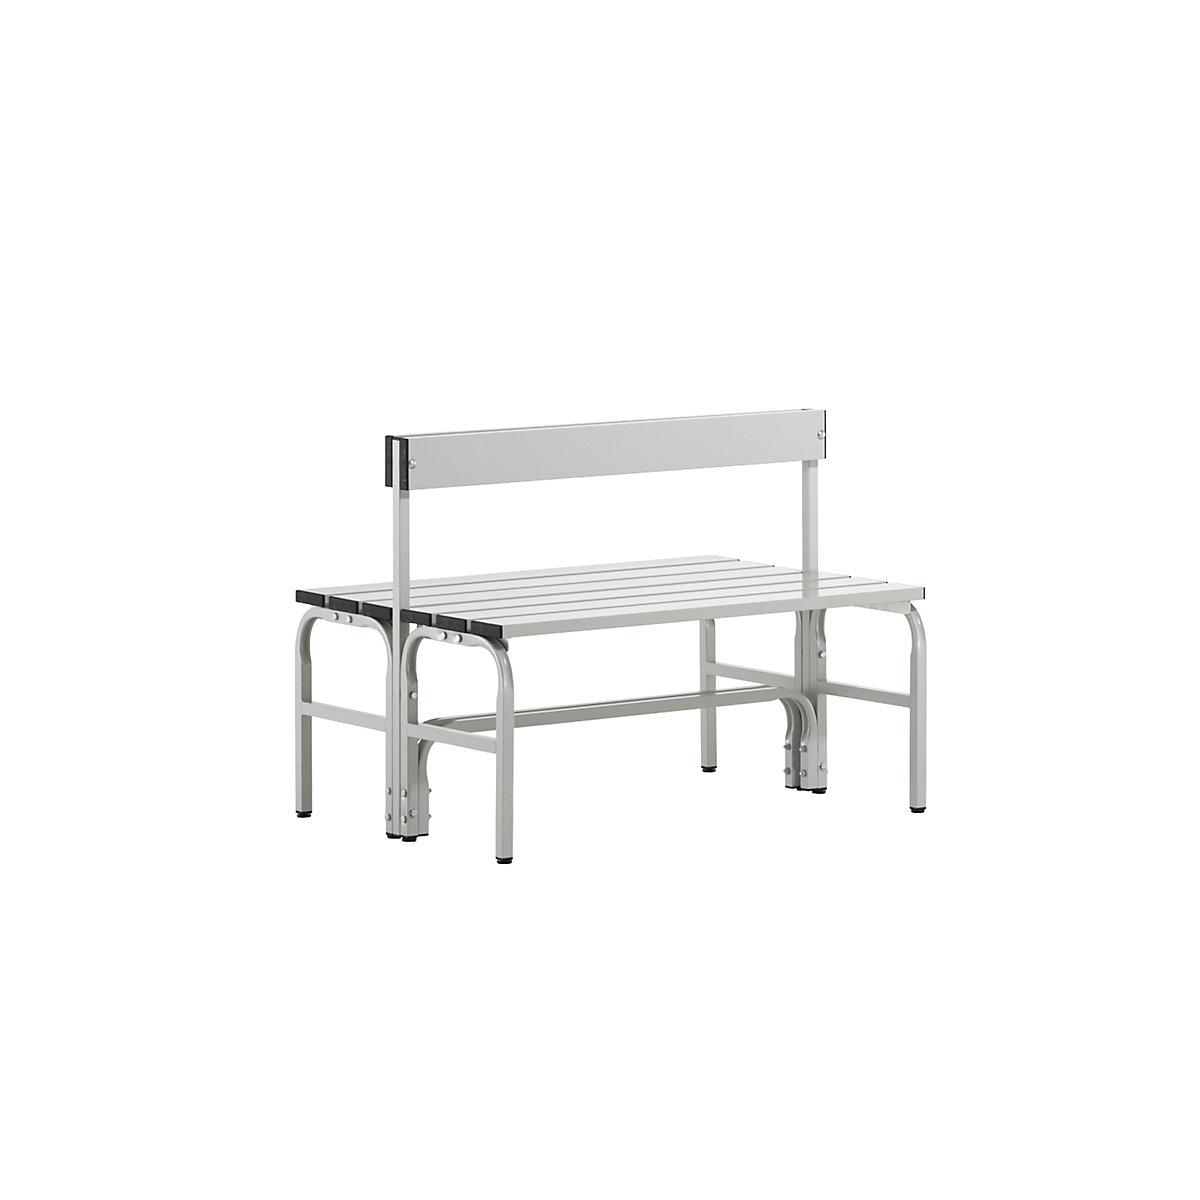 Half height cloakroom bench with back rest, double sided – Sypro, aluminium, length 1015 mm, light grey